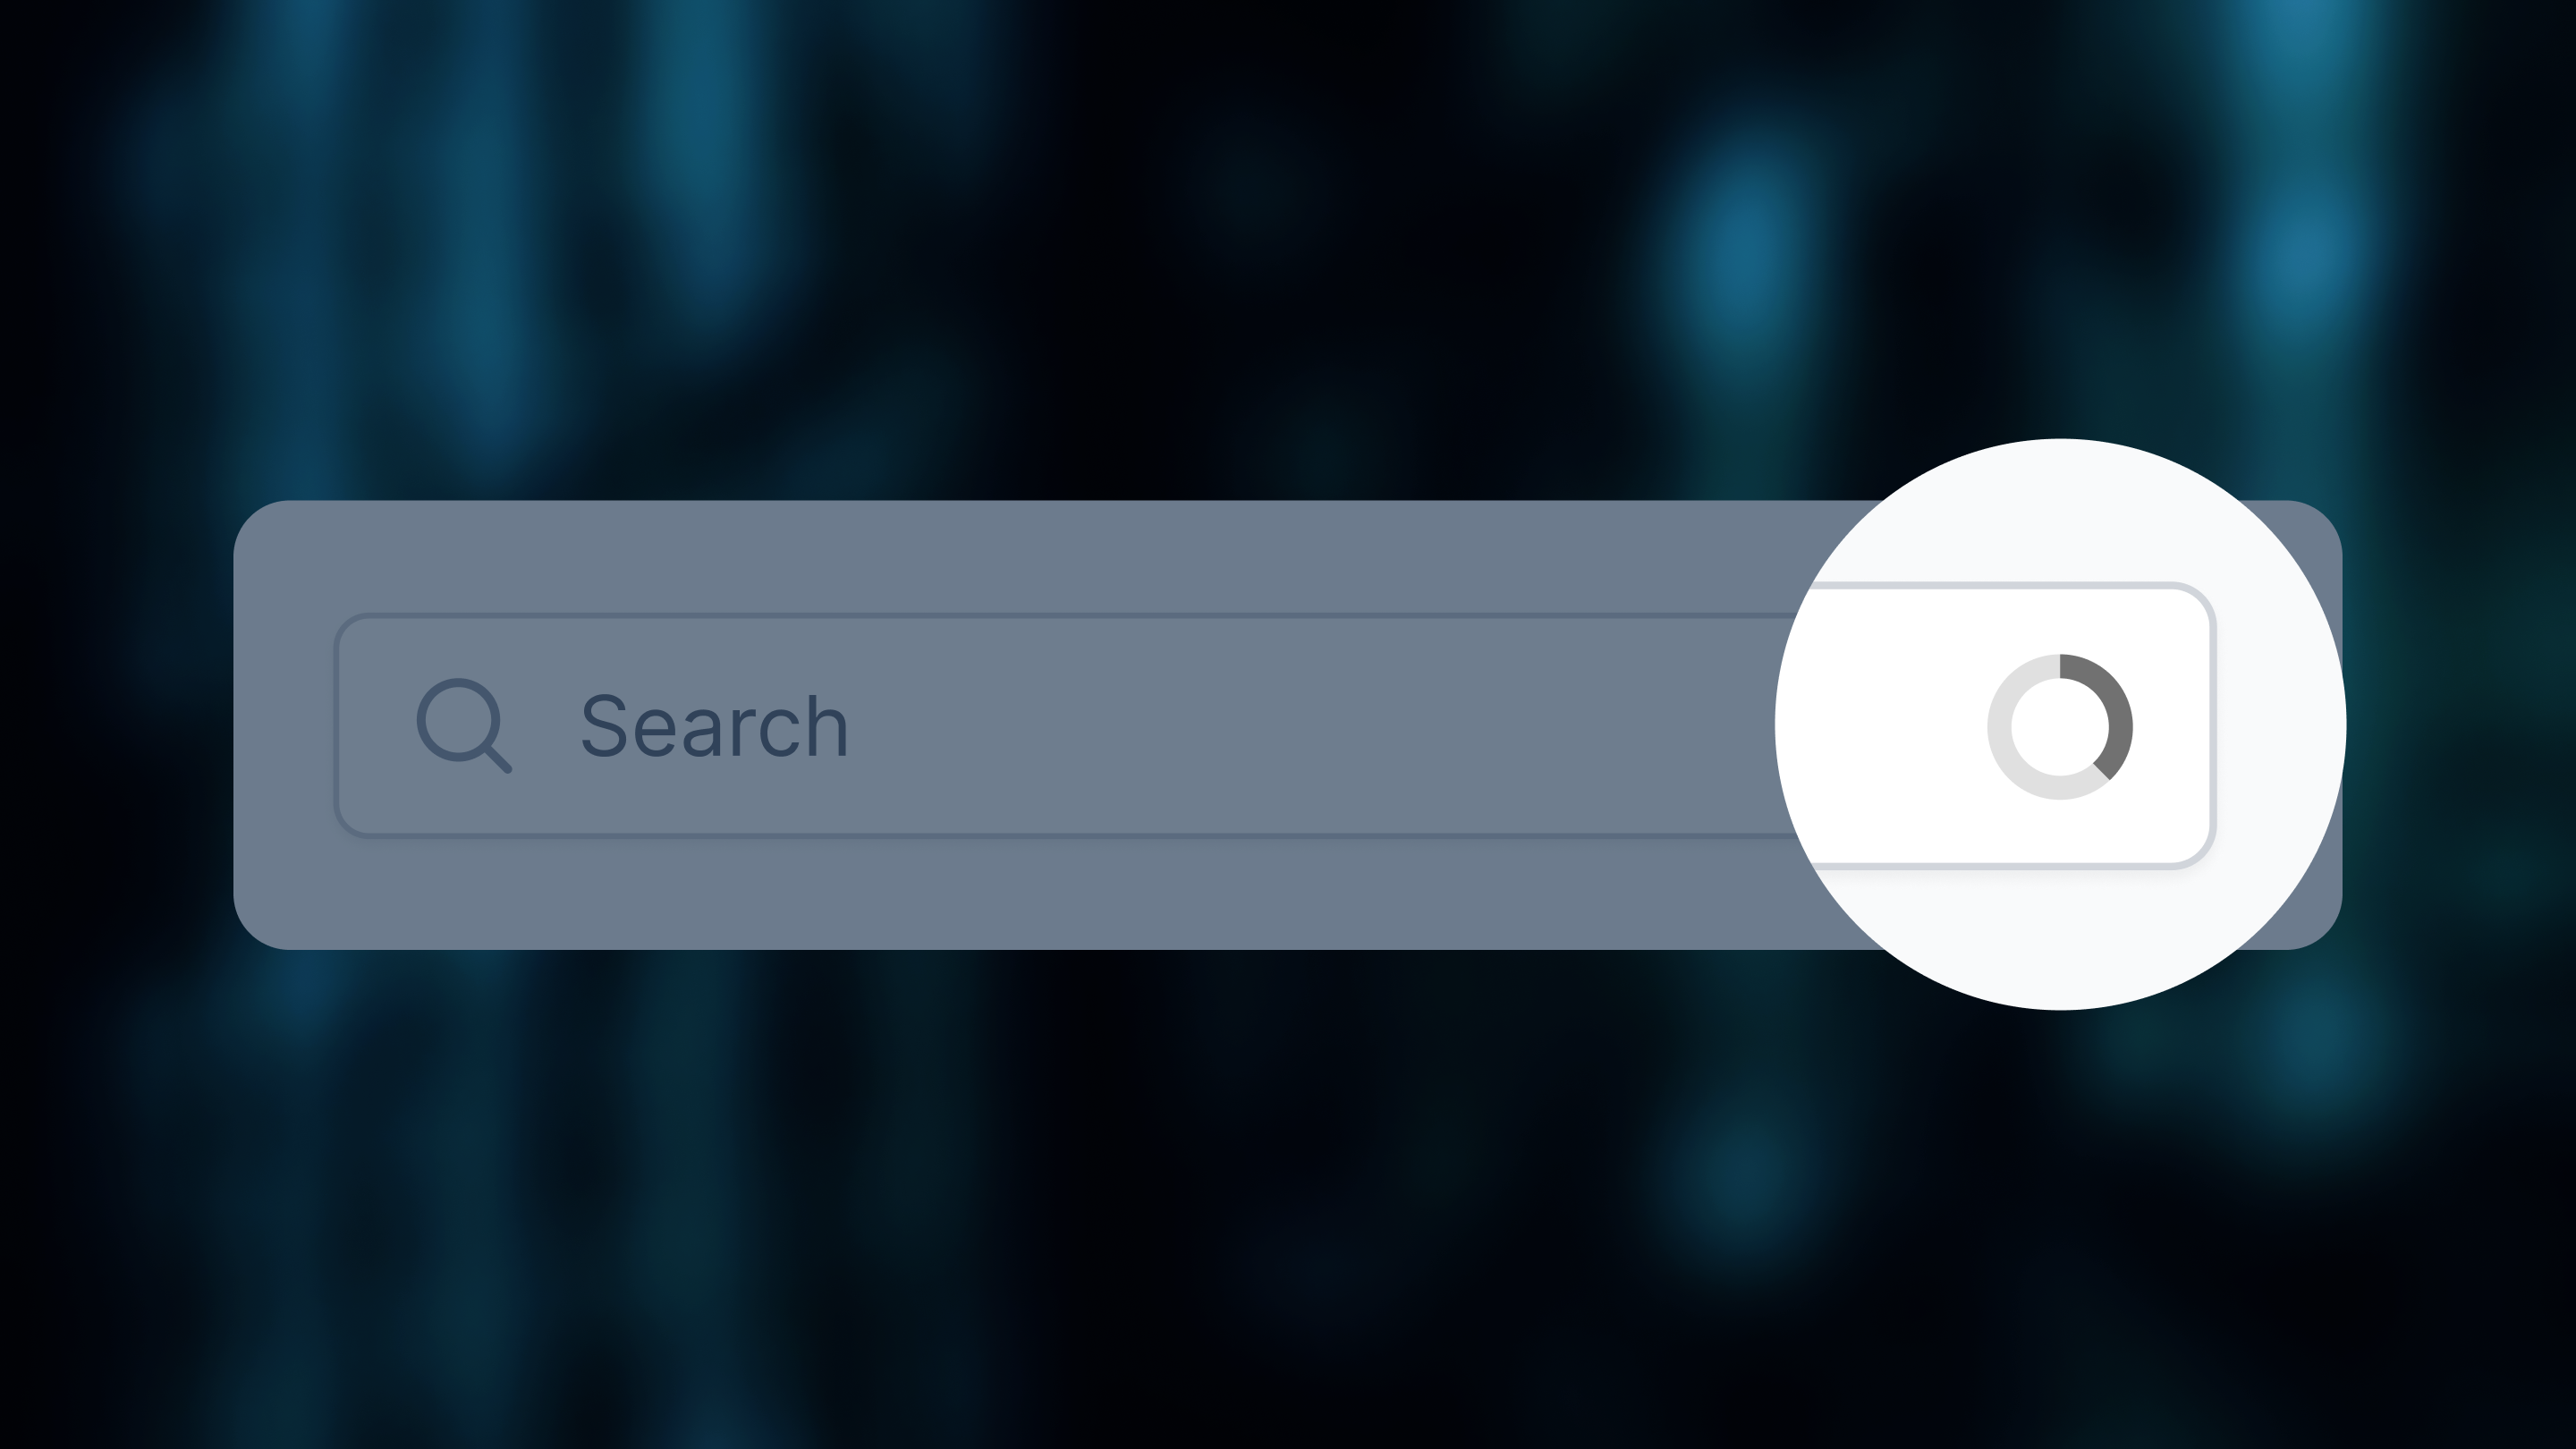 Showing pending UI during search